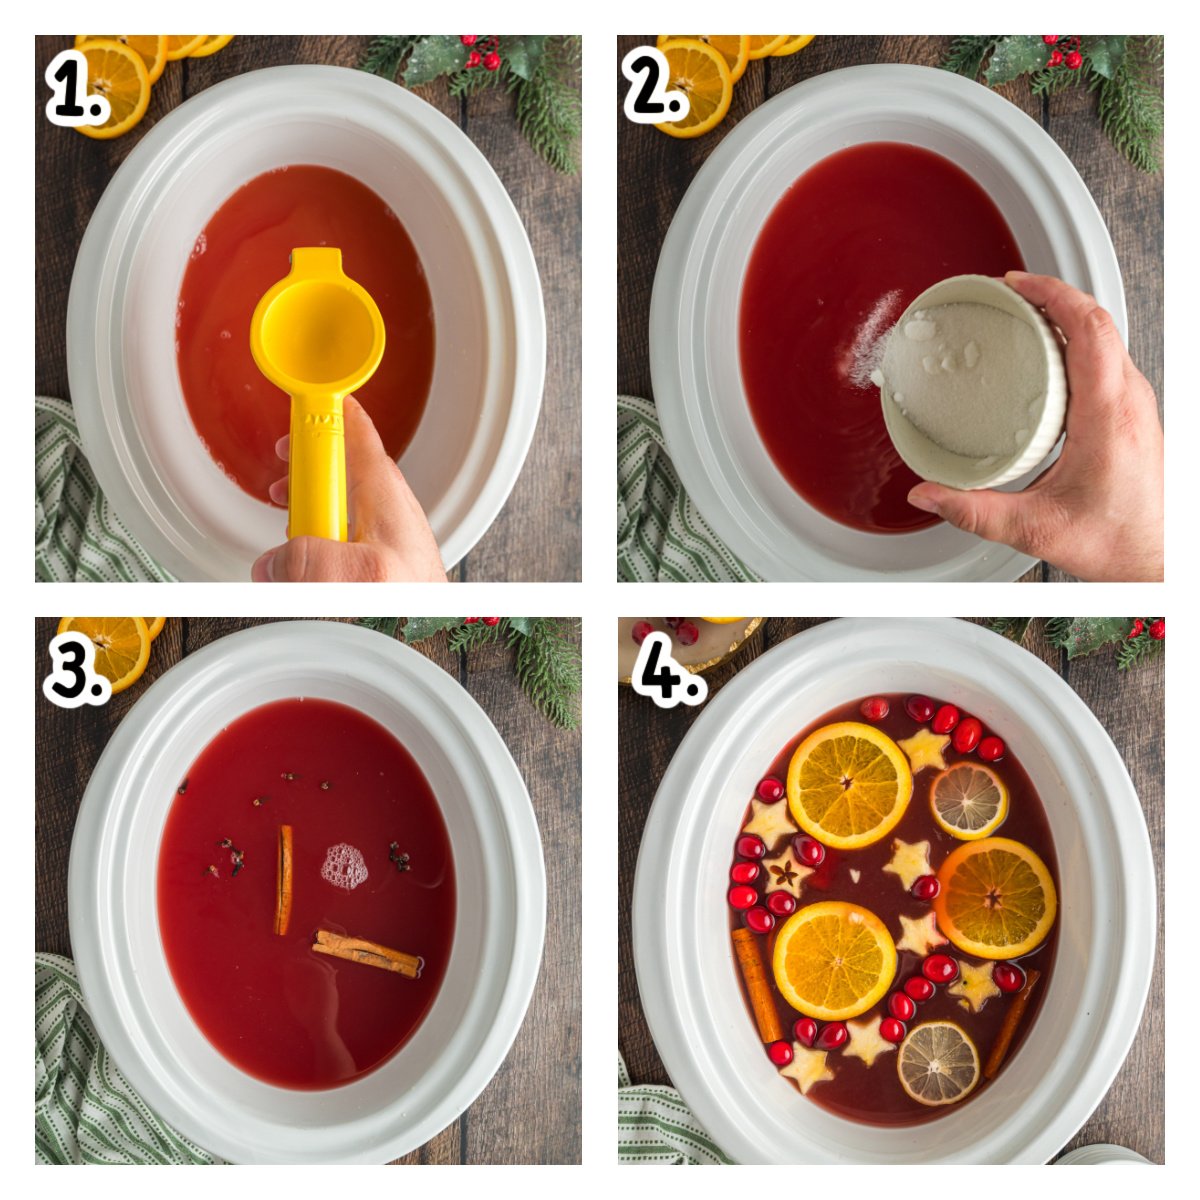 Four images showing how to make warm christmas punch in a slow cooker.